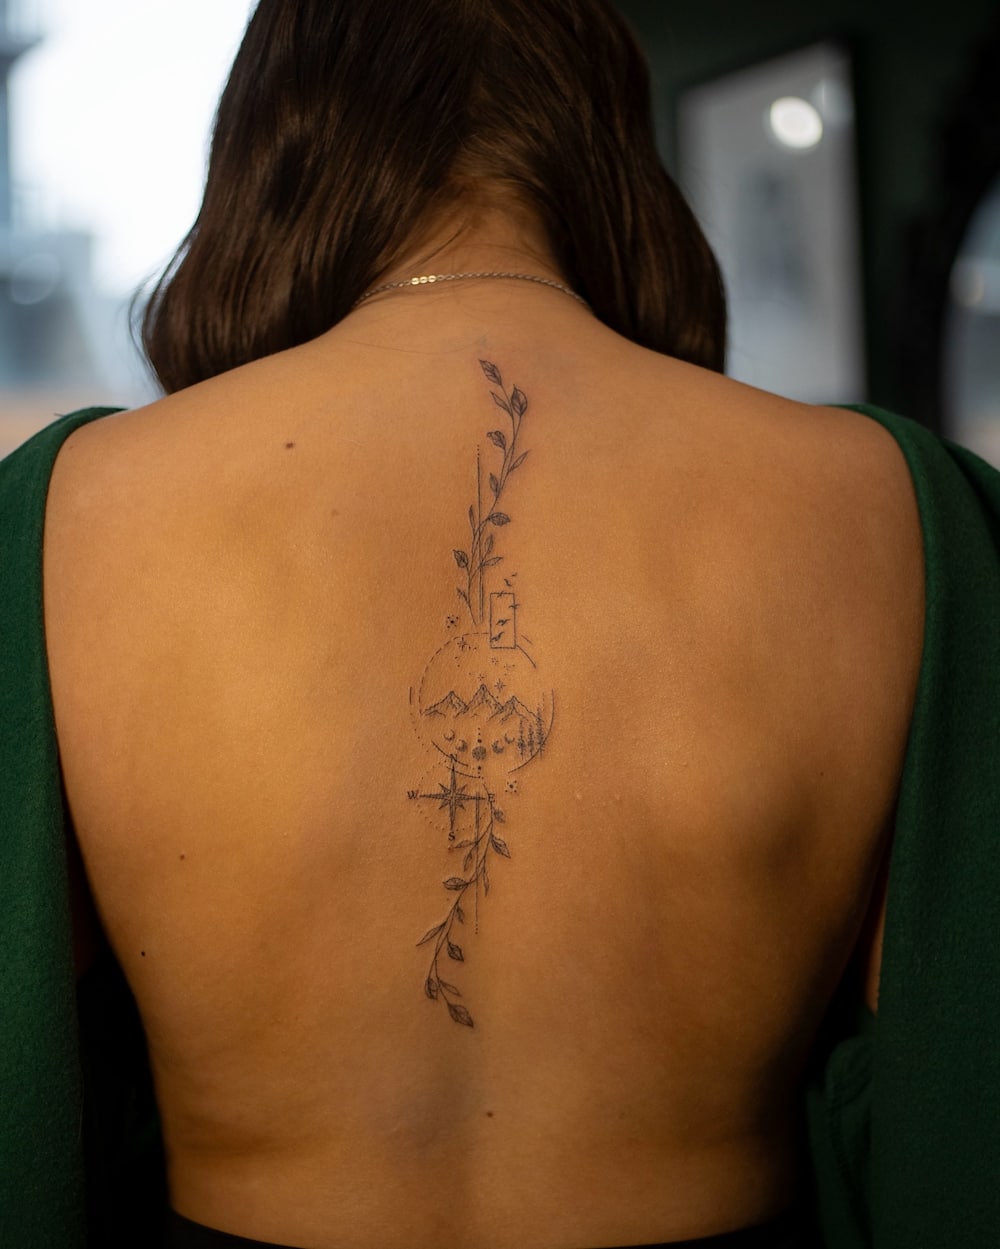 Back view of woman with intricate vine tattoo.